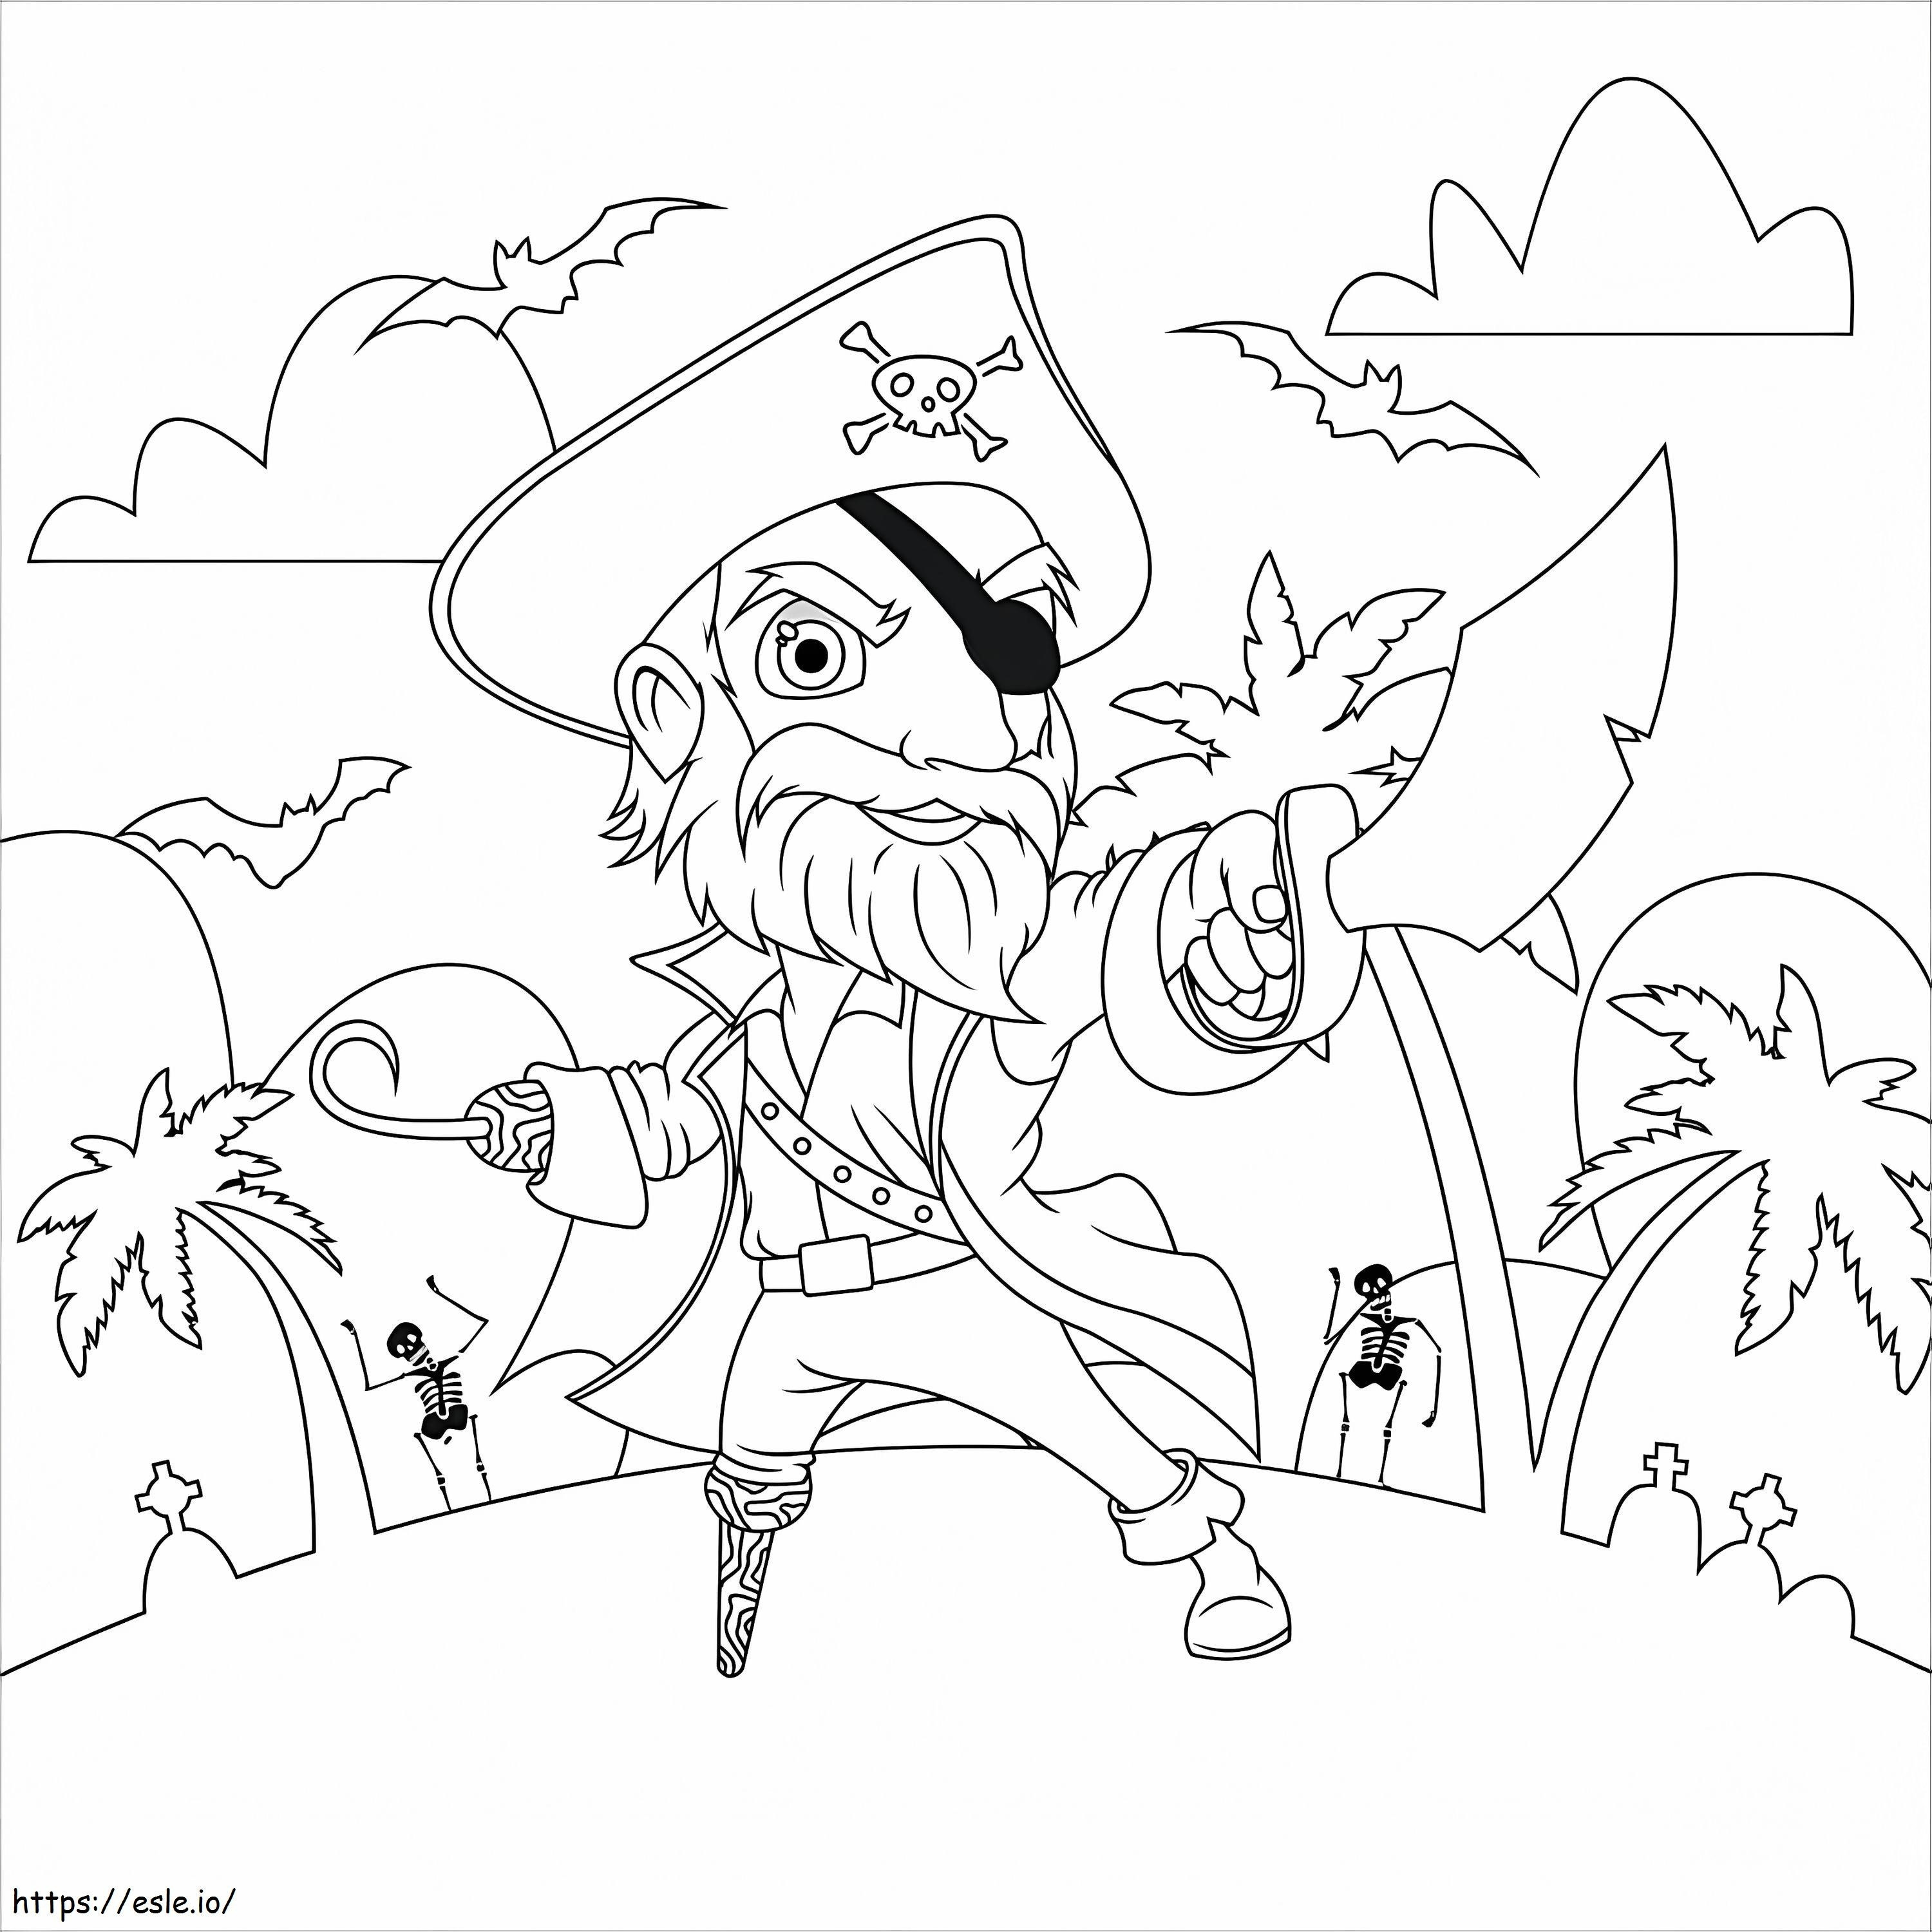 Amazing Hacker coloring page